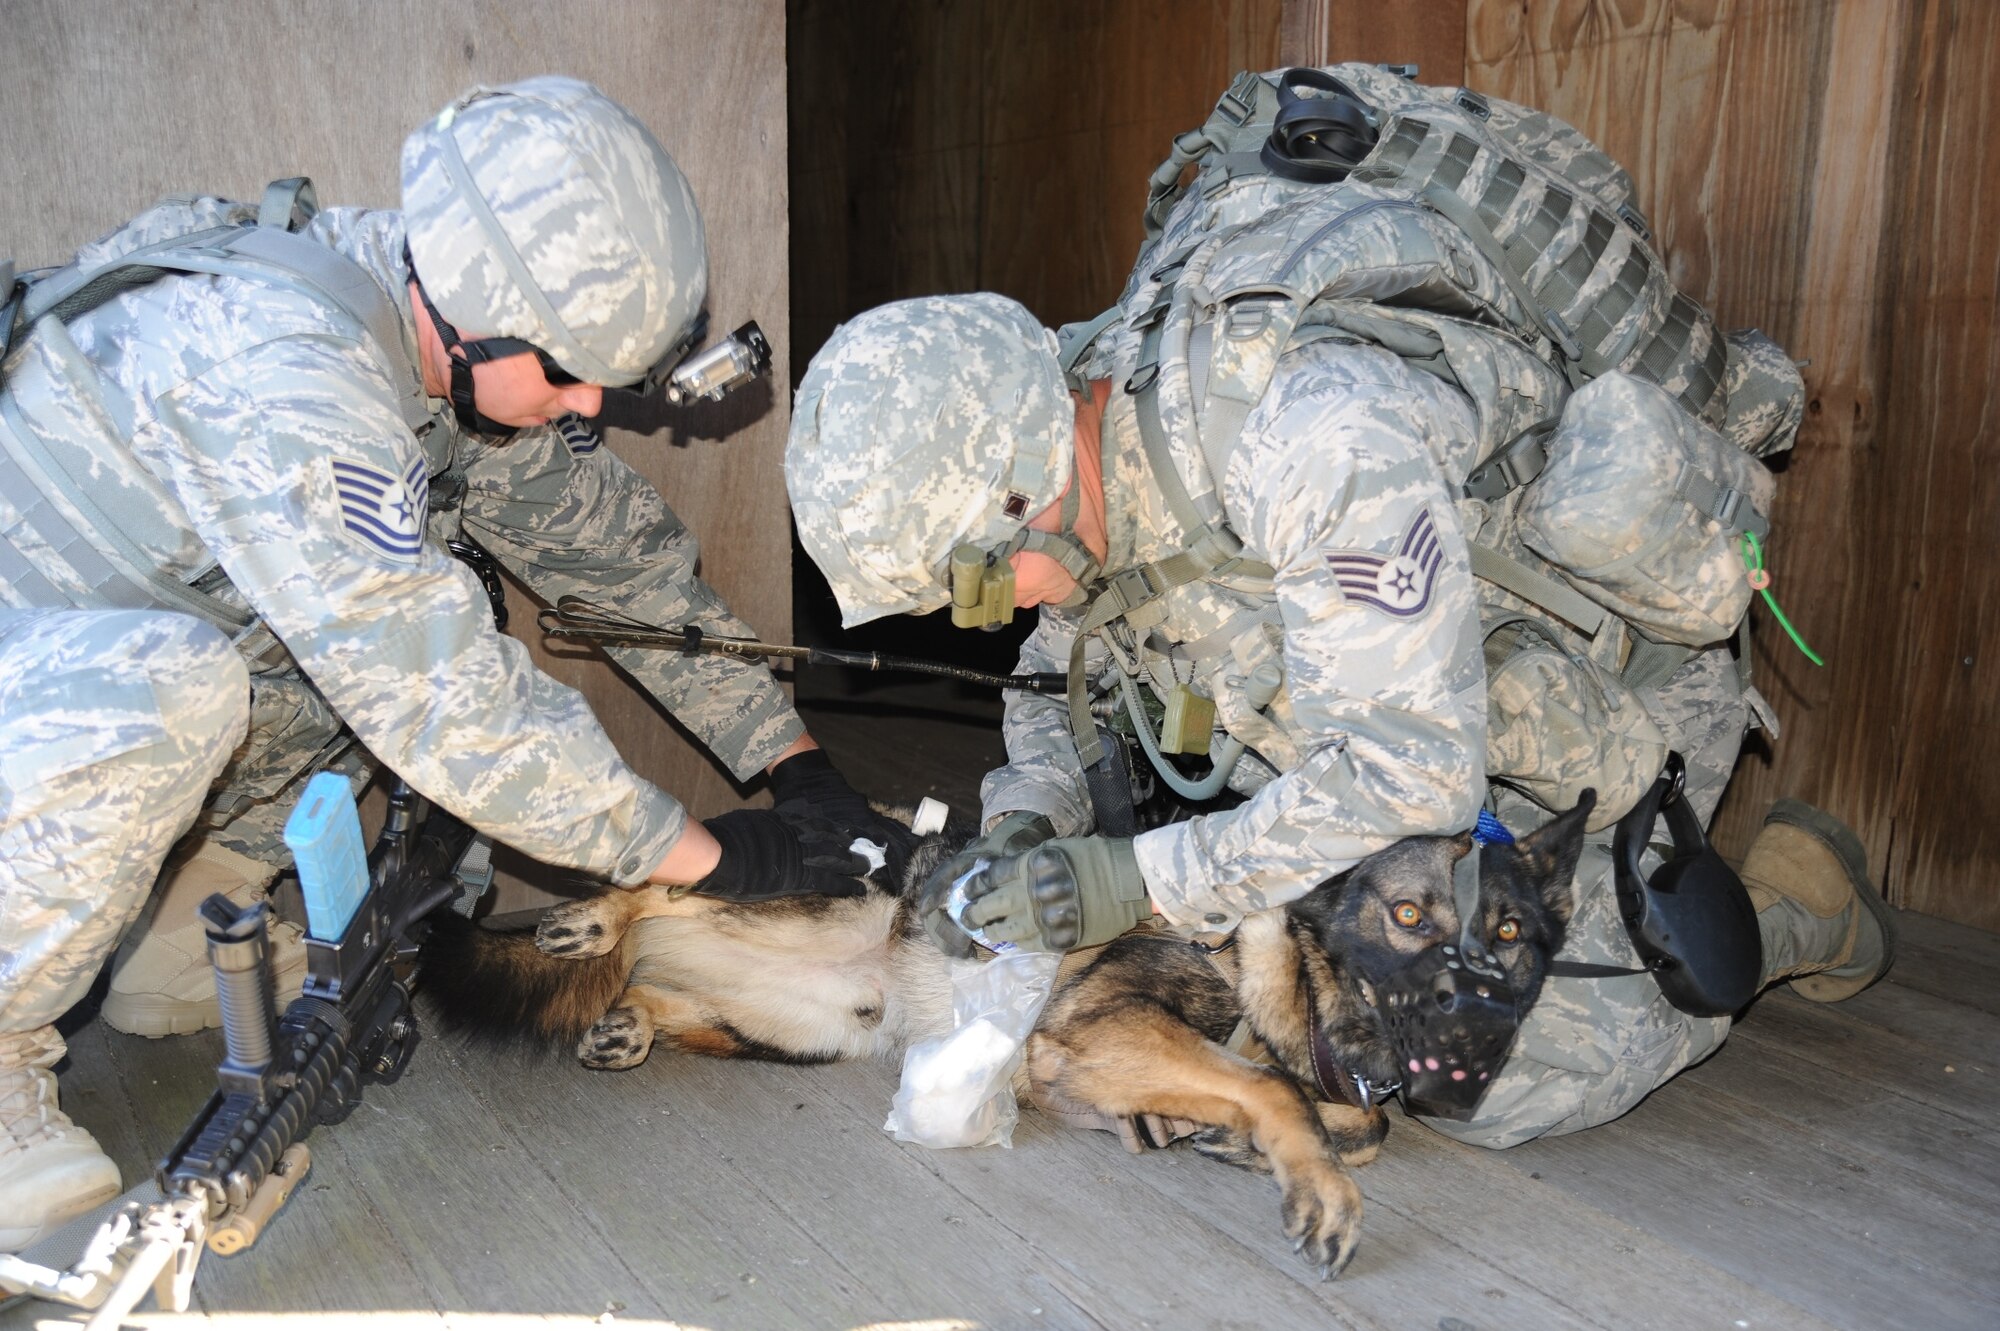 Tech. Sgt. Nathan Combs, Joint Base Pearl Harbour-Hickam military working dog handler, and Staff Sgt. Brandon Serena, Patrick Air Force Base, Fla., MWD handler, perform first aid exercises on Dome, a MWD, during the MWD Base Security Operations Course Nov. 10, 2013, at Joint Base McGuire-Dix-Lakehurst, N.J. (U.S. Air Force photo by Staff Sgt. Nathaniel Bevier/Released)